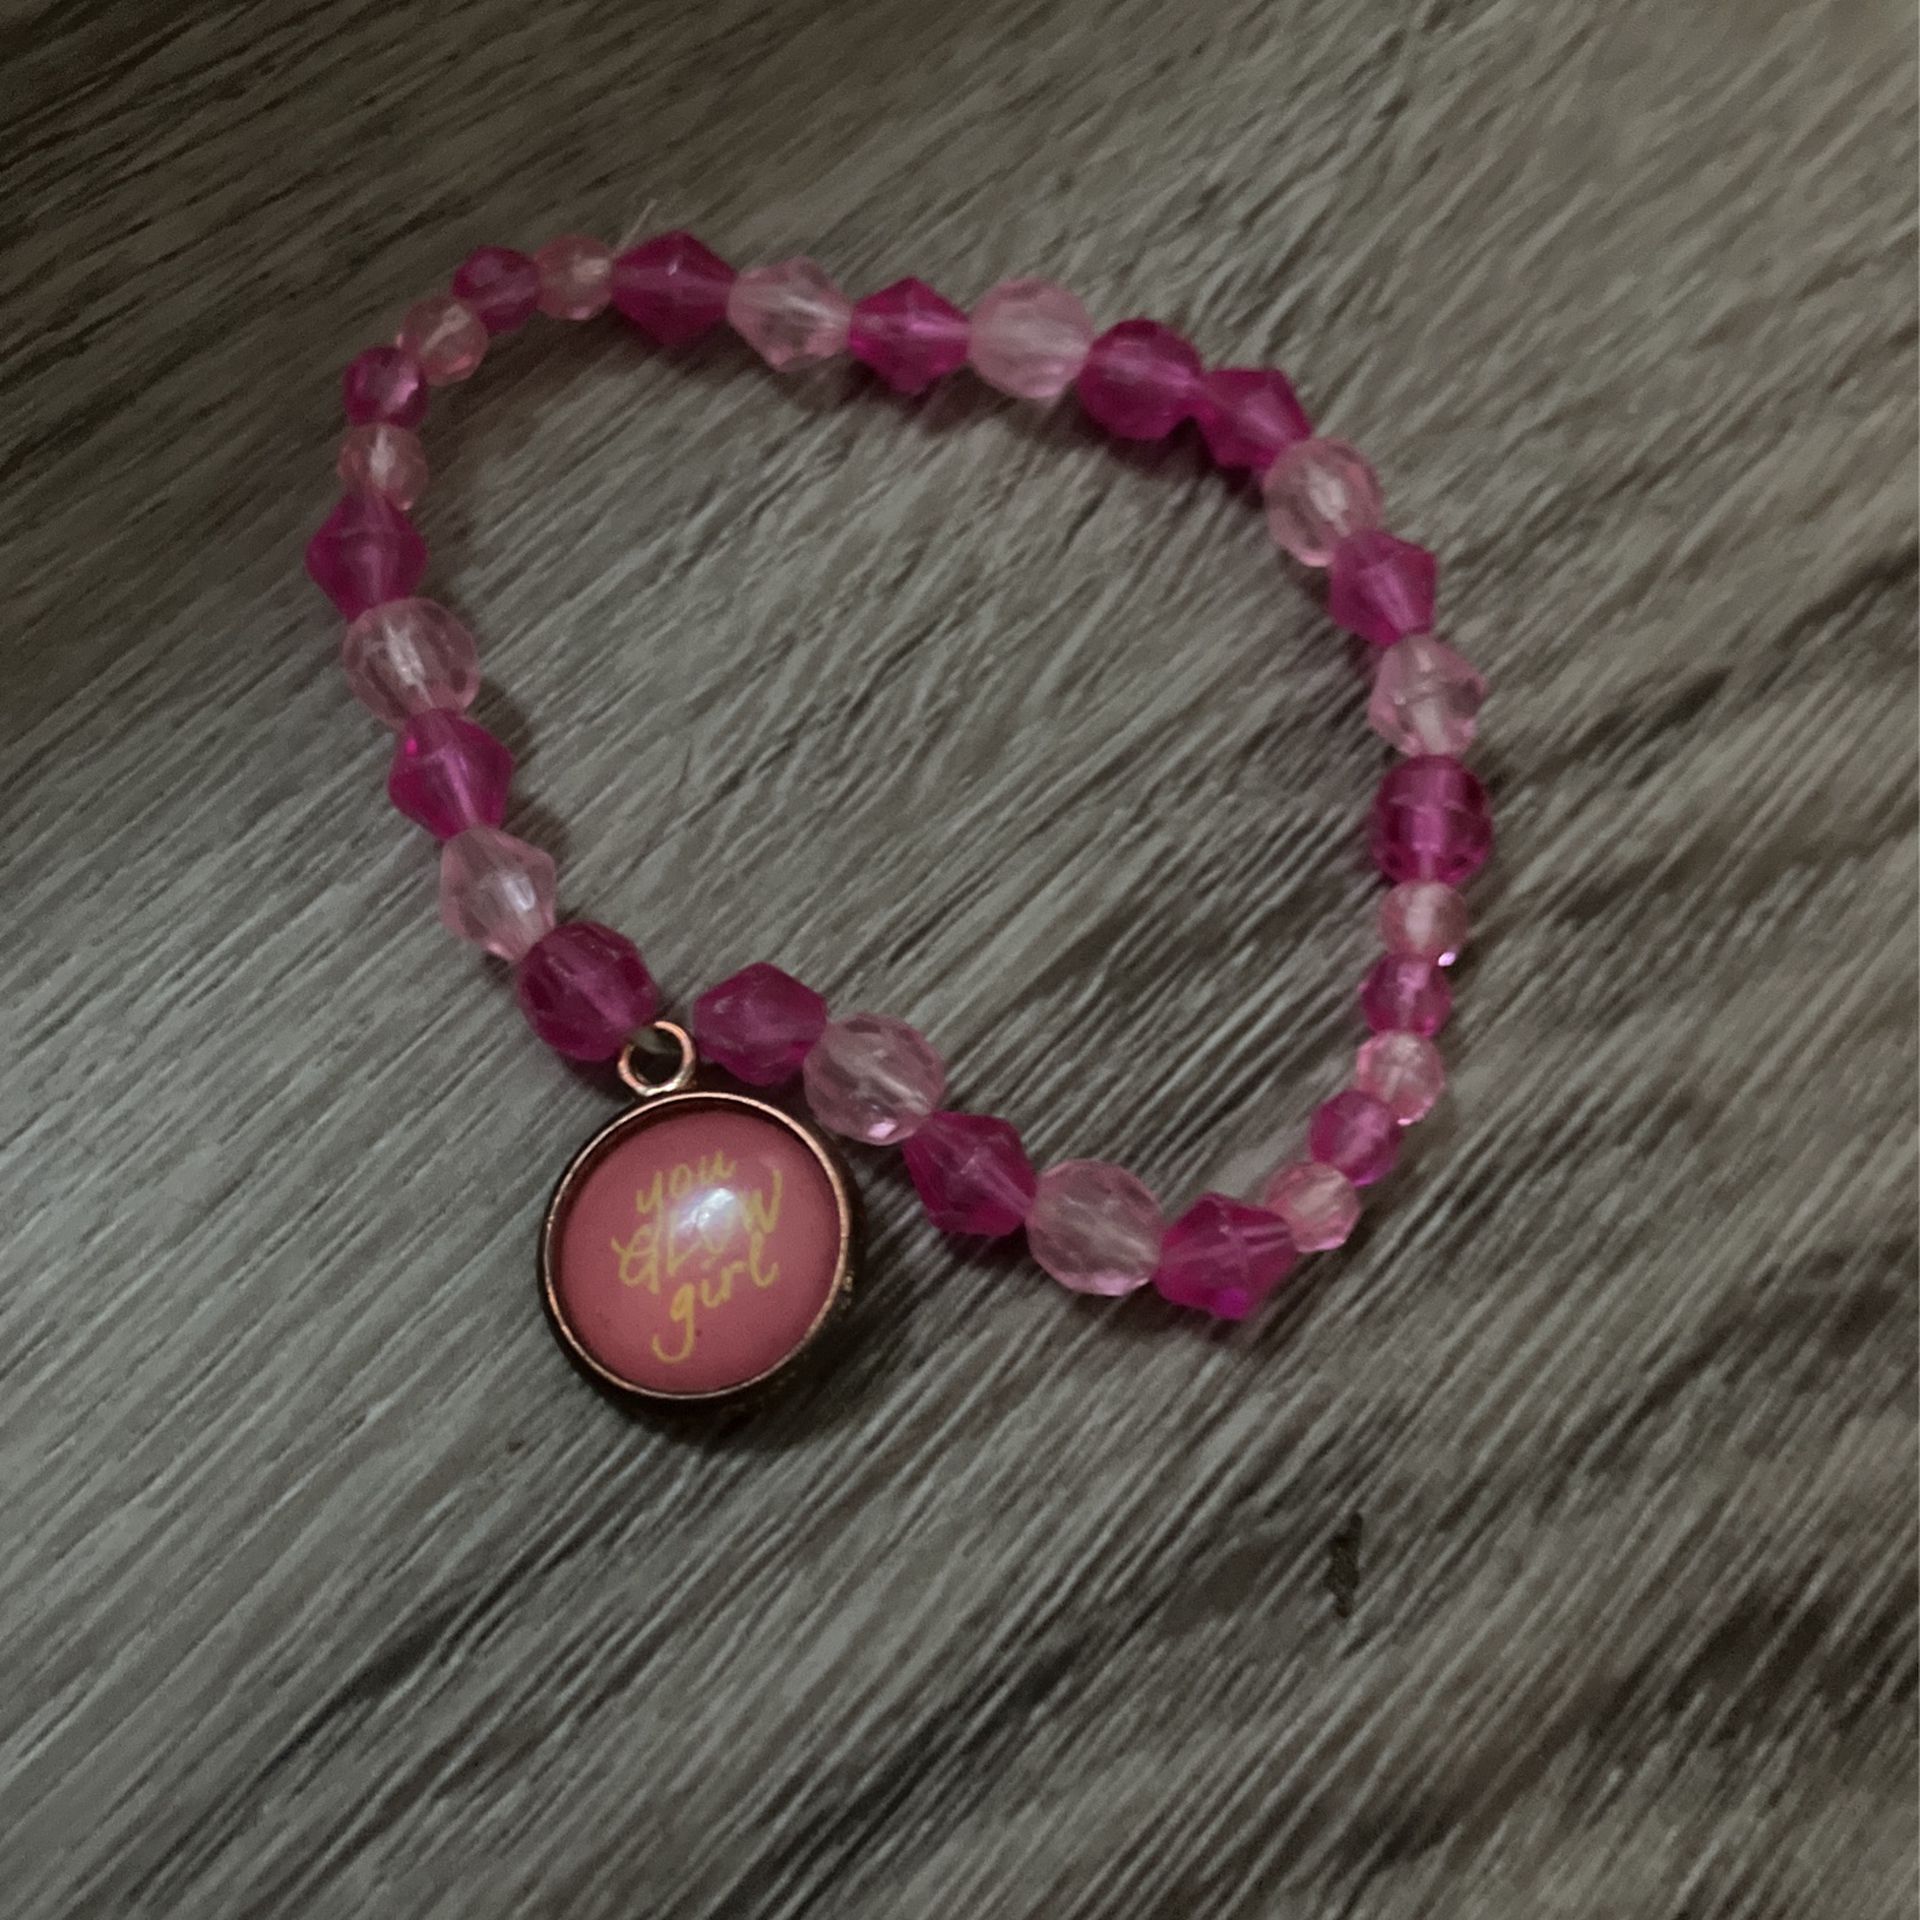 White and dark pink bracelet with charm that says you glow girl